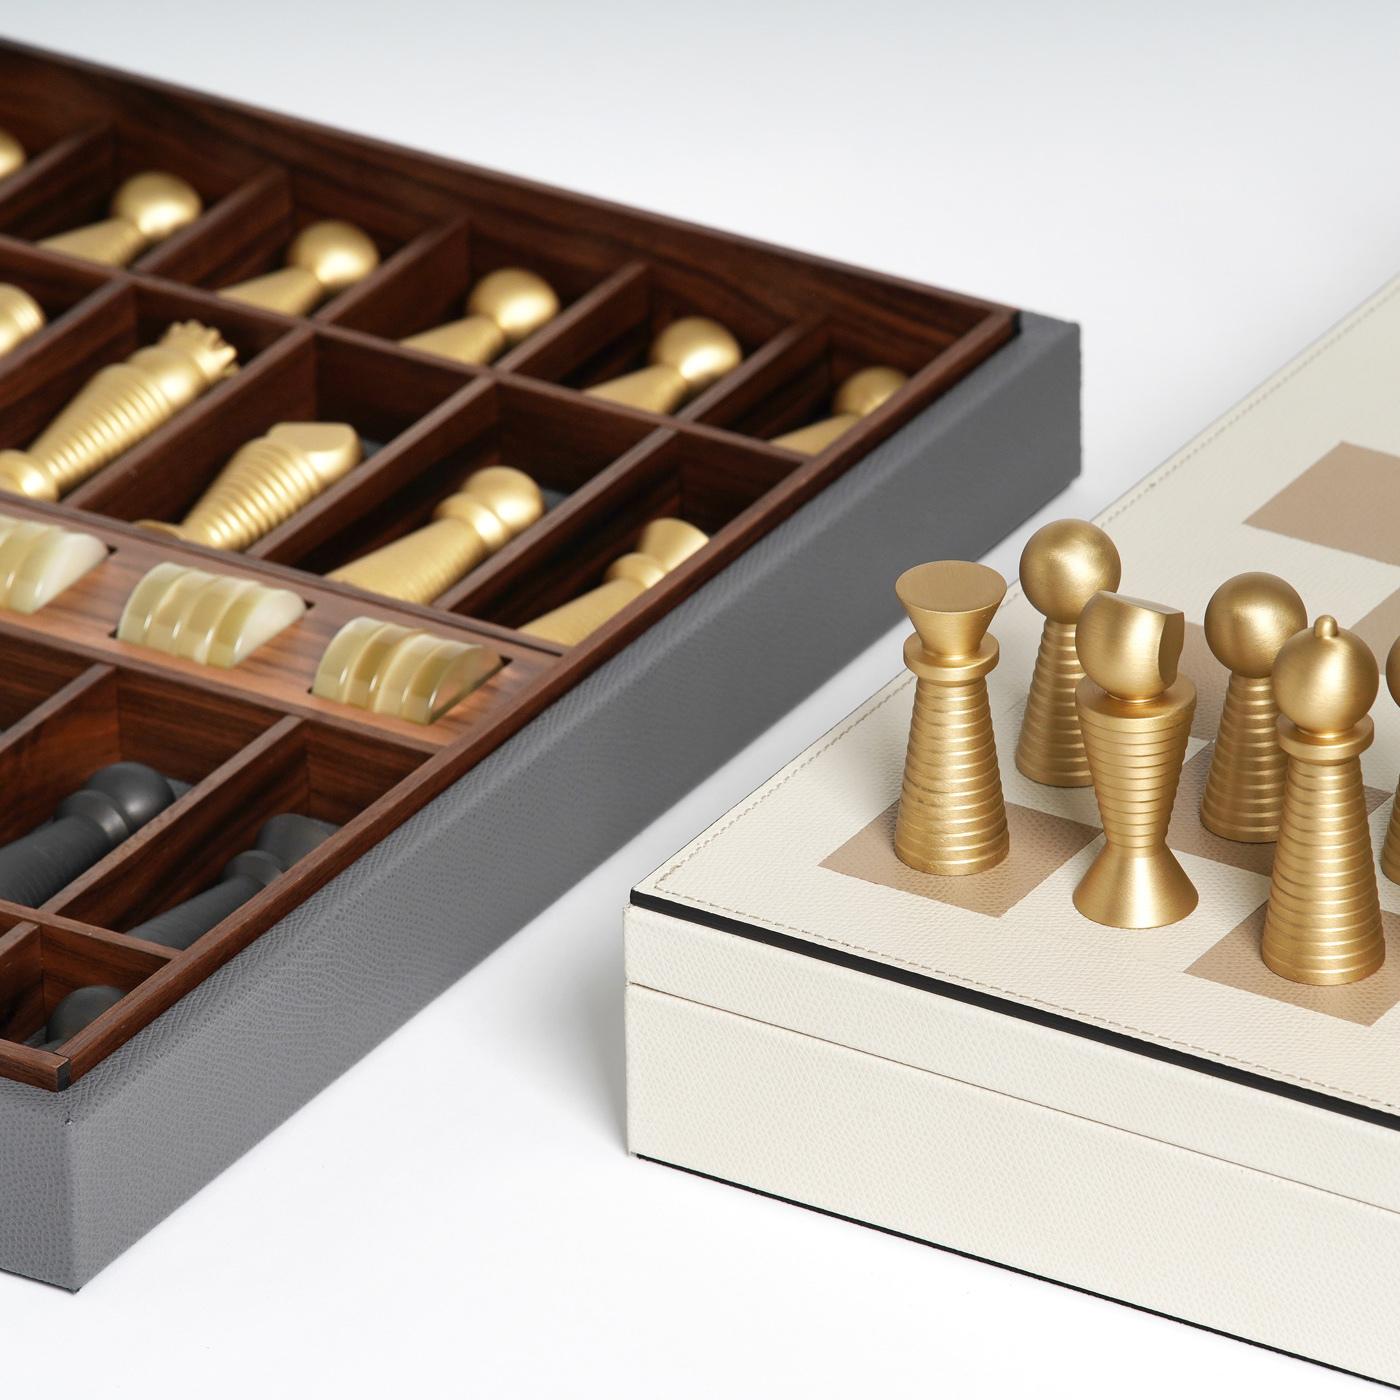 This chess and checkers board game set is a stunning decorative accent piece for both classical and modern interior decors. This piece is entirely crafted of walnut upholstered in gray leather, the top completed with white squares for the